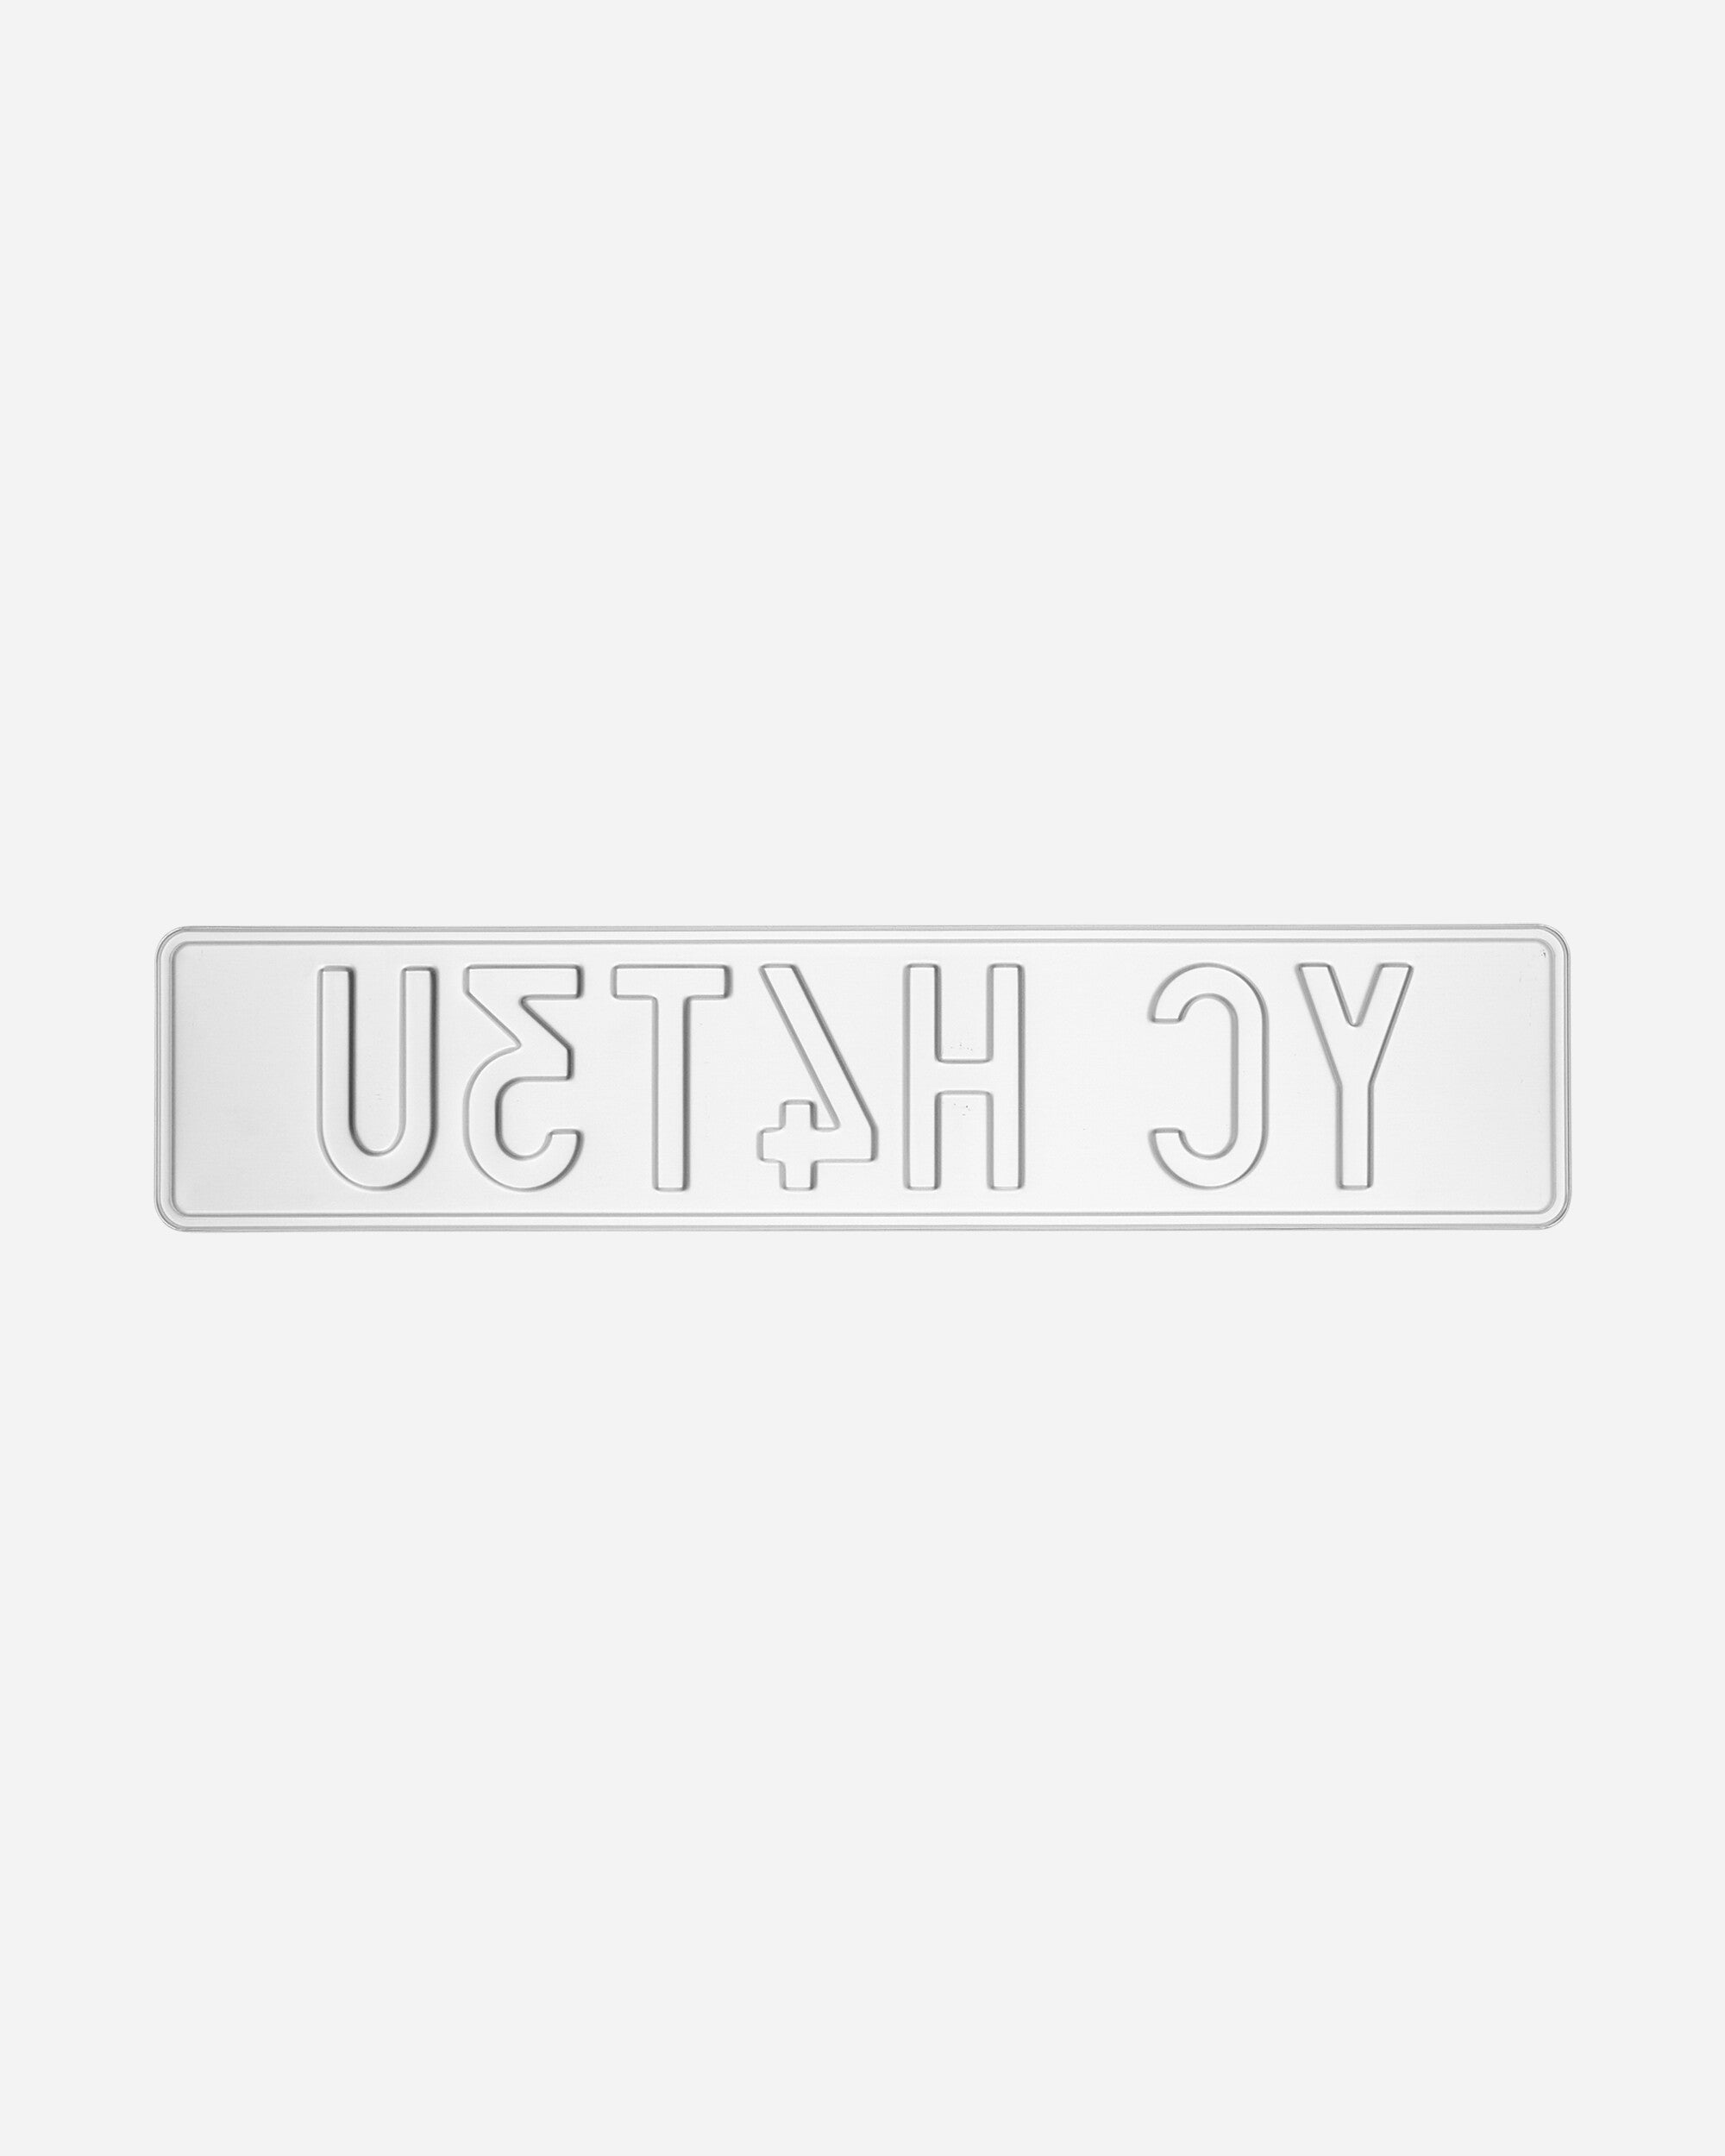 Youth Club Yc License Plate Black Home Decor Design Items LICENSEPLATE-PLATE BLACK